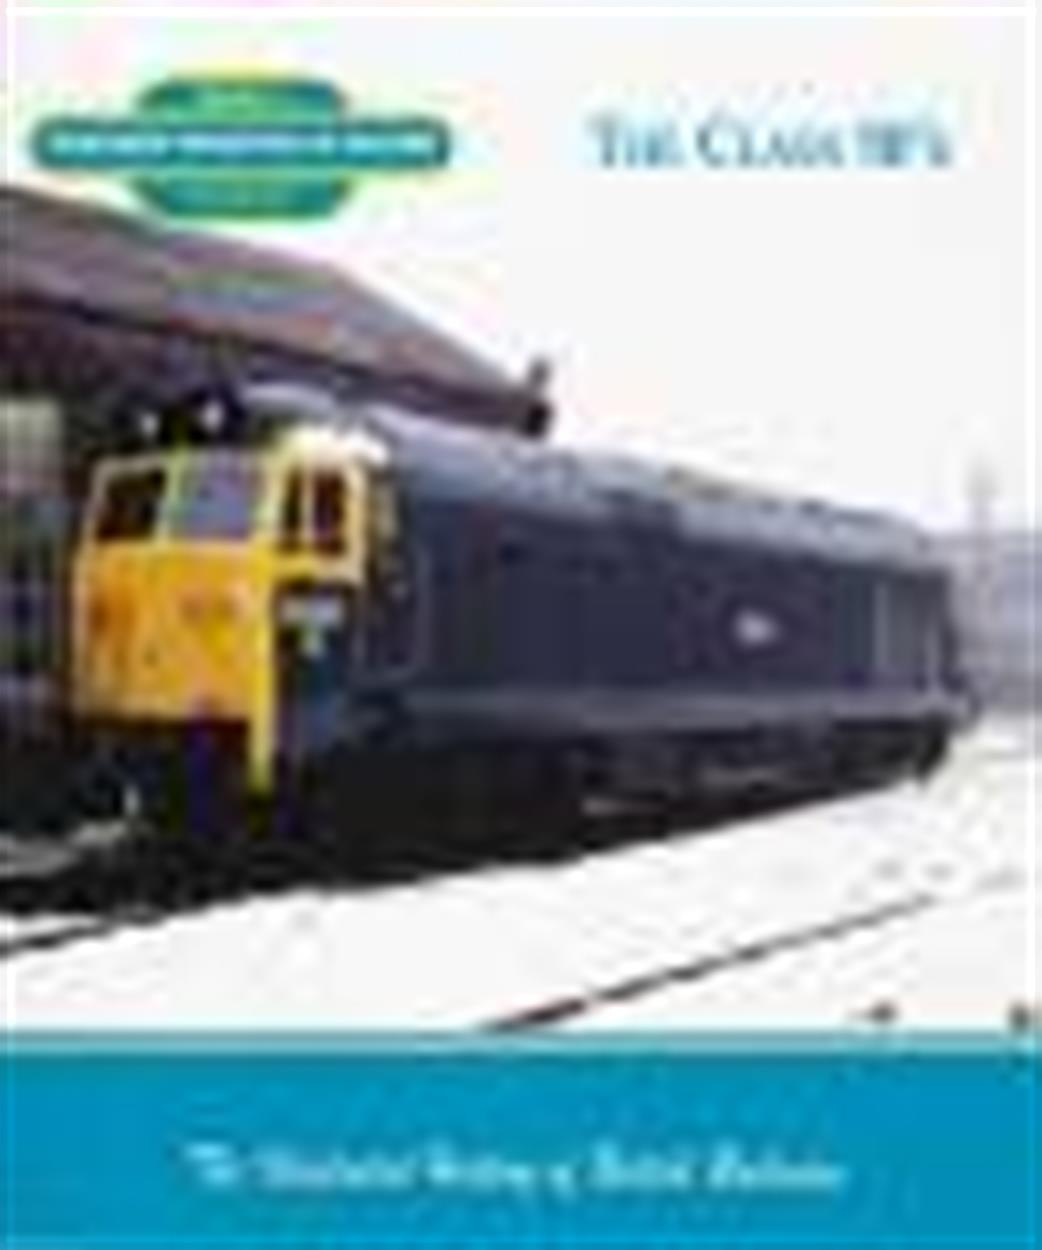 9781903016404 The Class 50's by Kevin Derrick